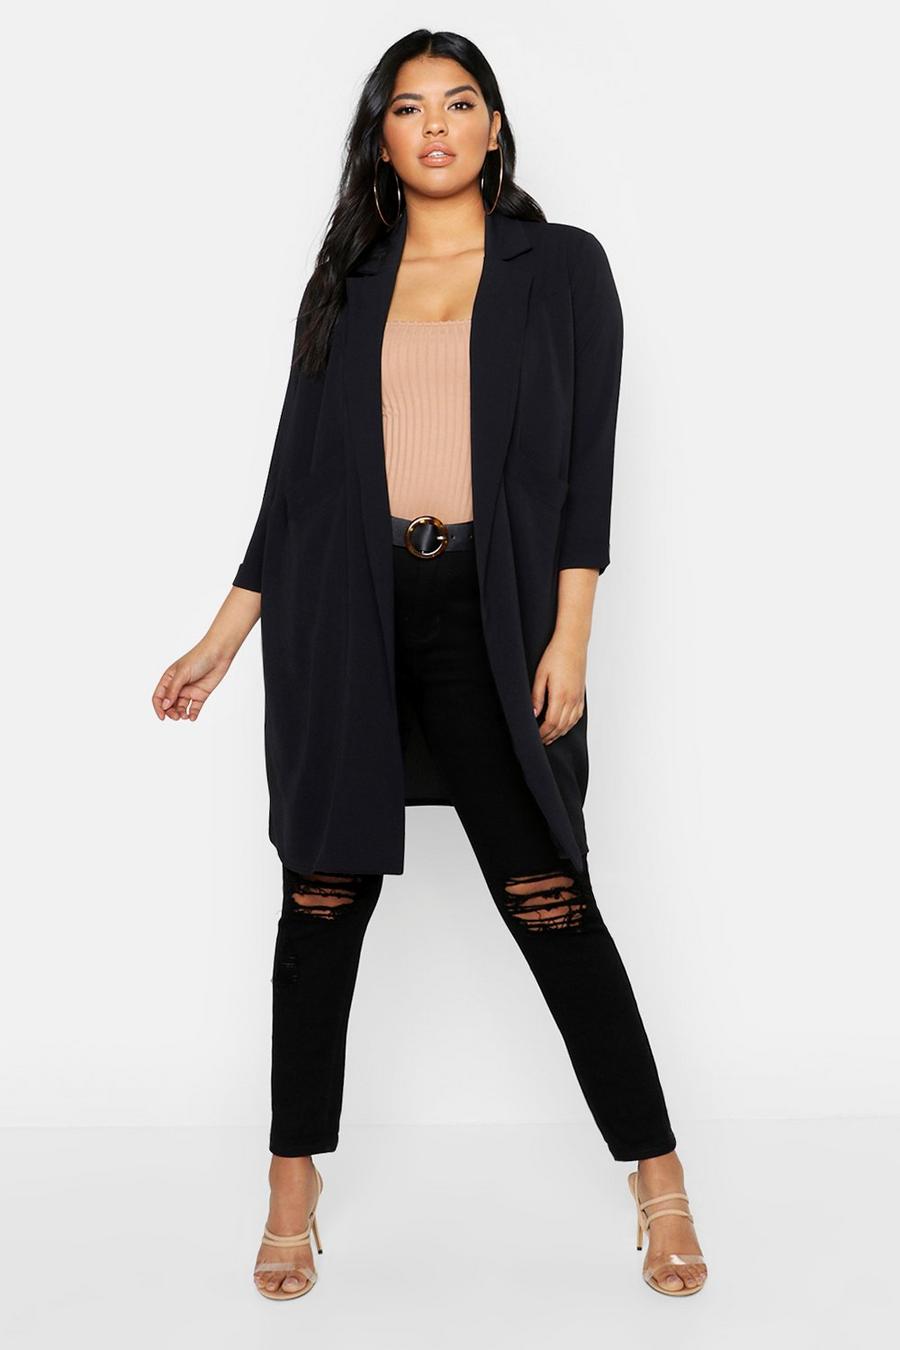 Forever 21 Plus Size Duster Cardigan  Plus size womens clothing, Plus size  duster cardigan, Plus size